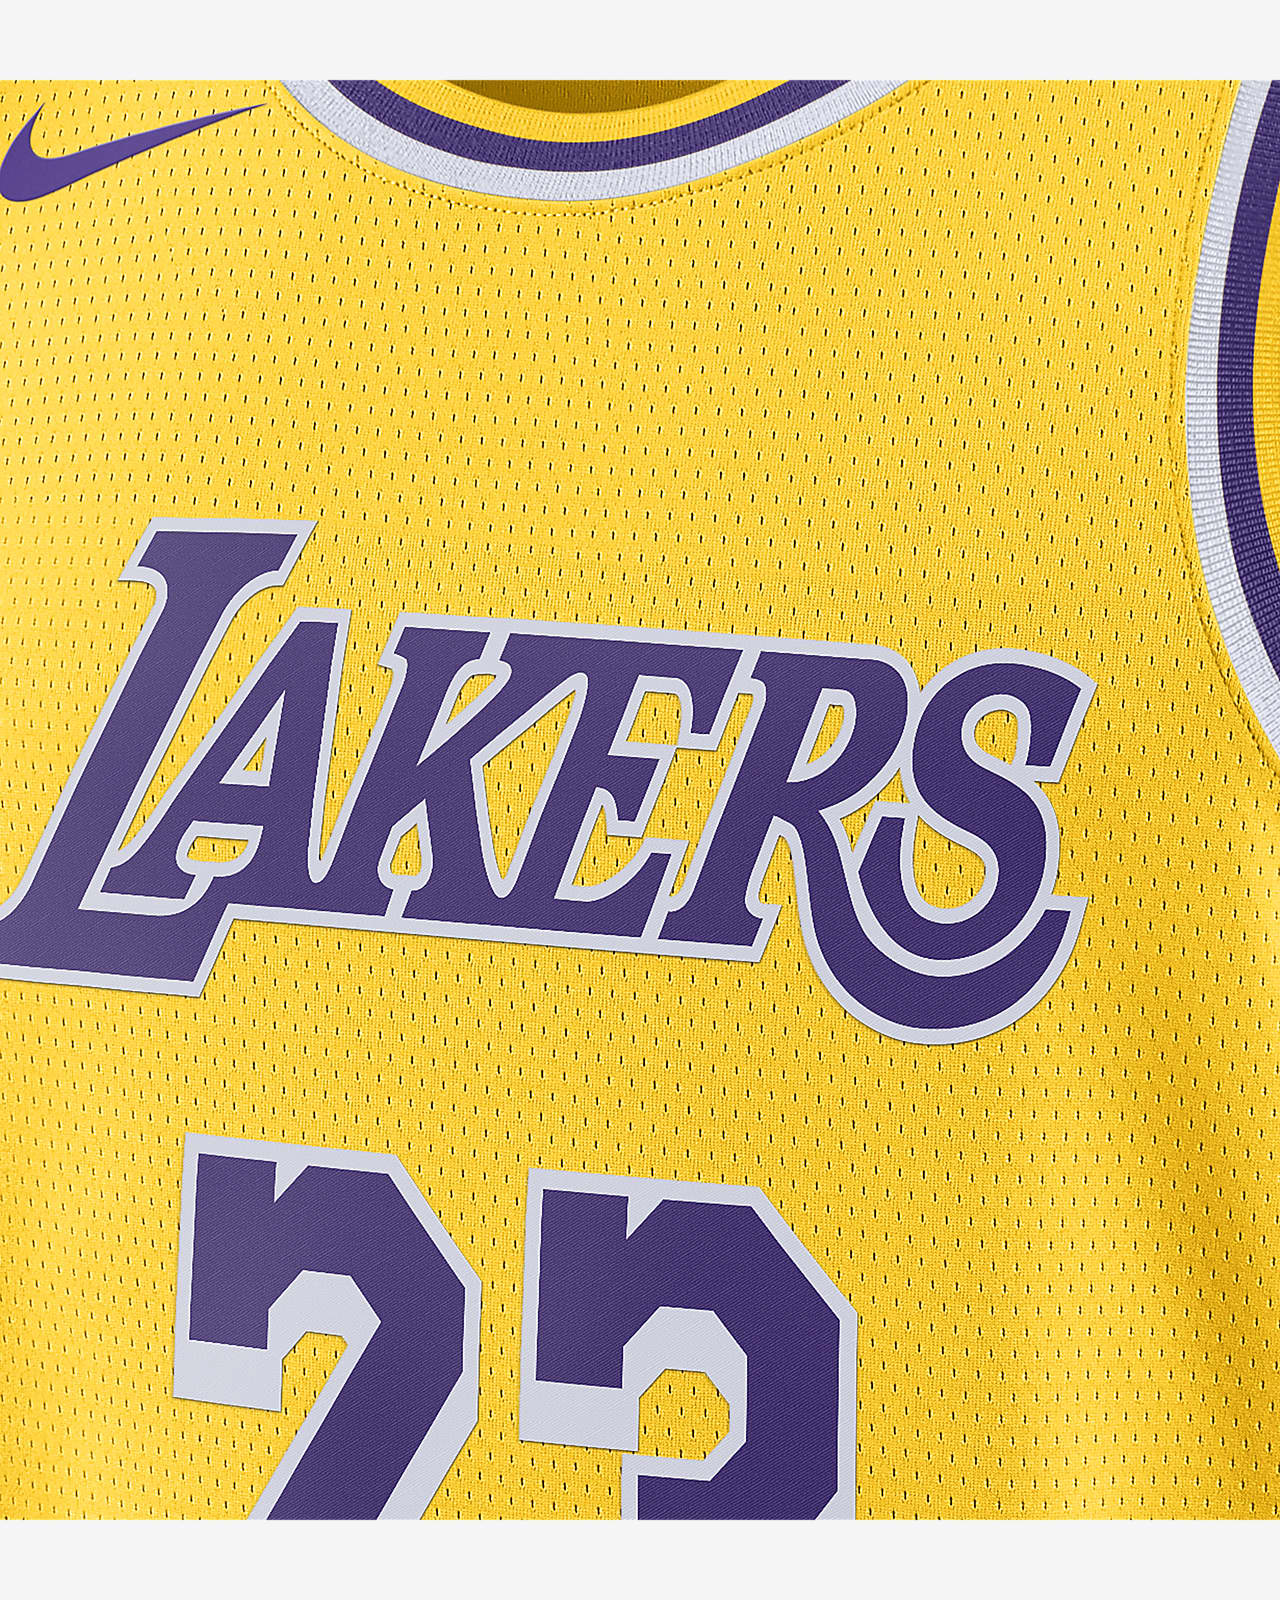 los angeles lakers jersey